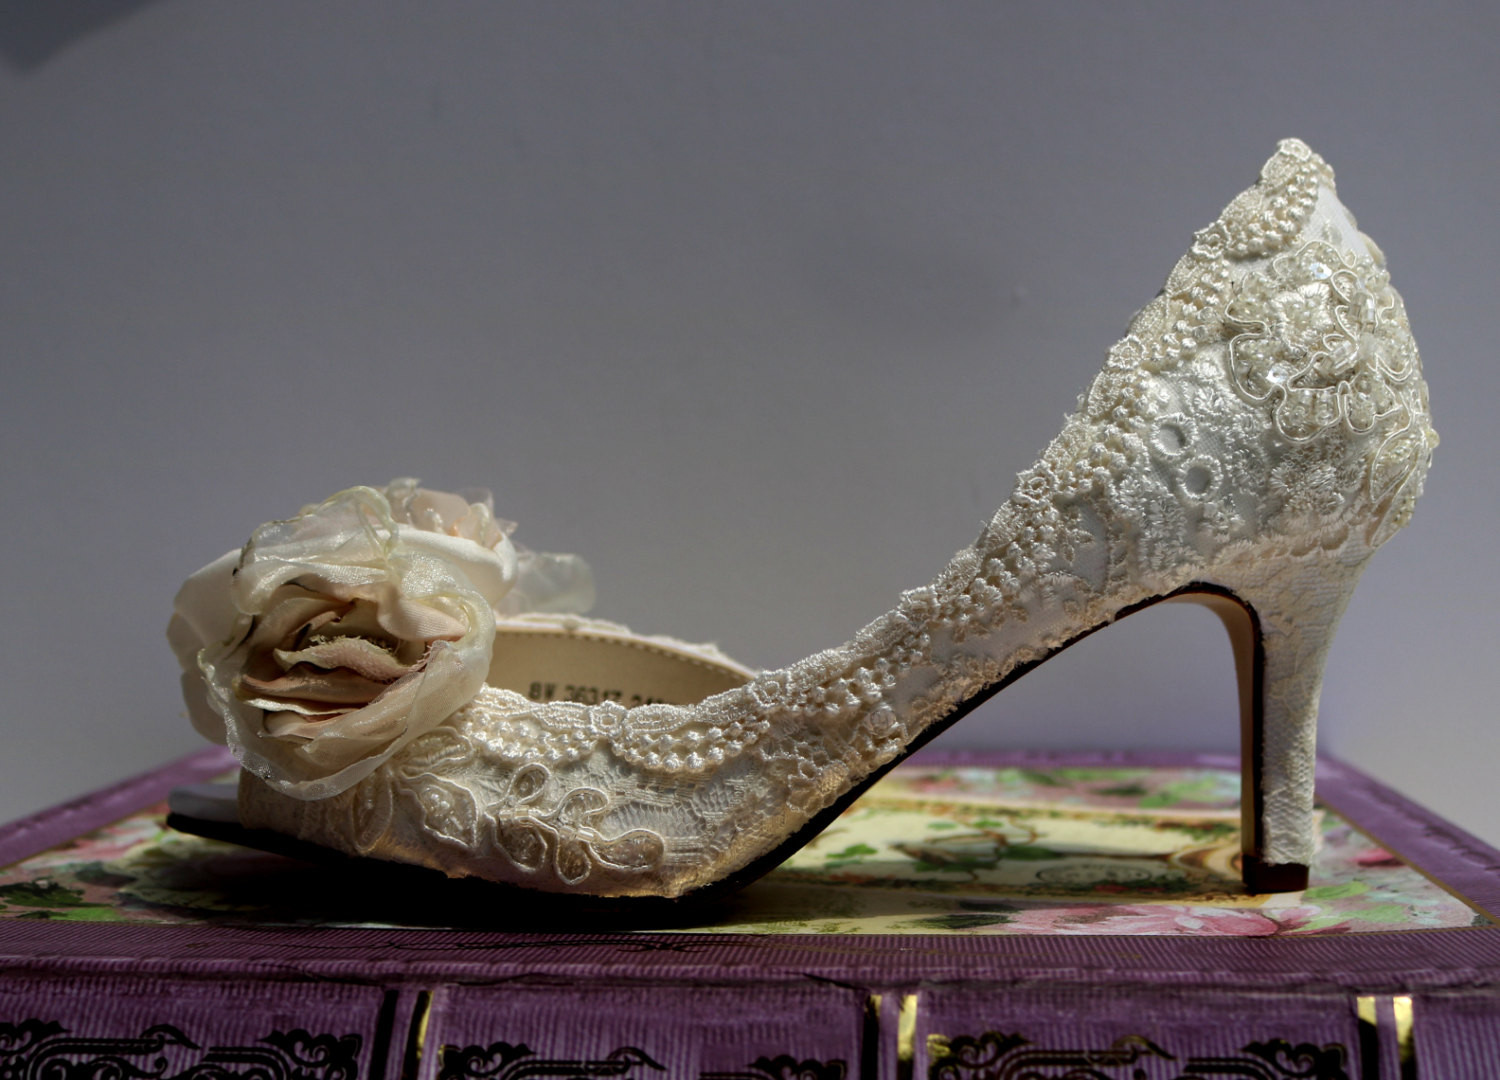 Vintage Wedding Shoes Low Heel
 Low Heel Wedding Shoes Vintage Lace Shoes Blush and Ivory